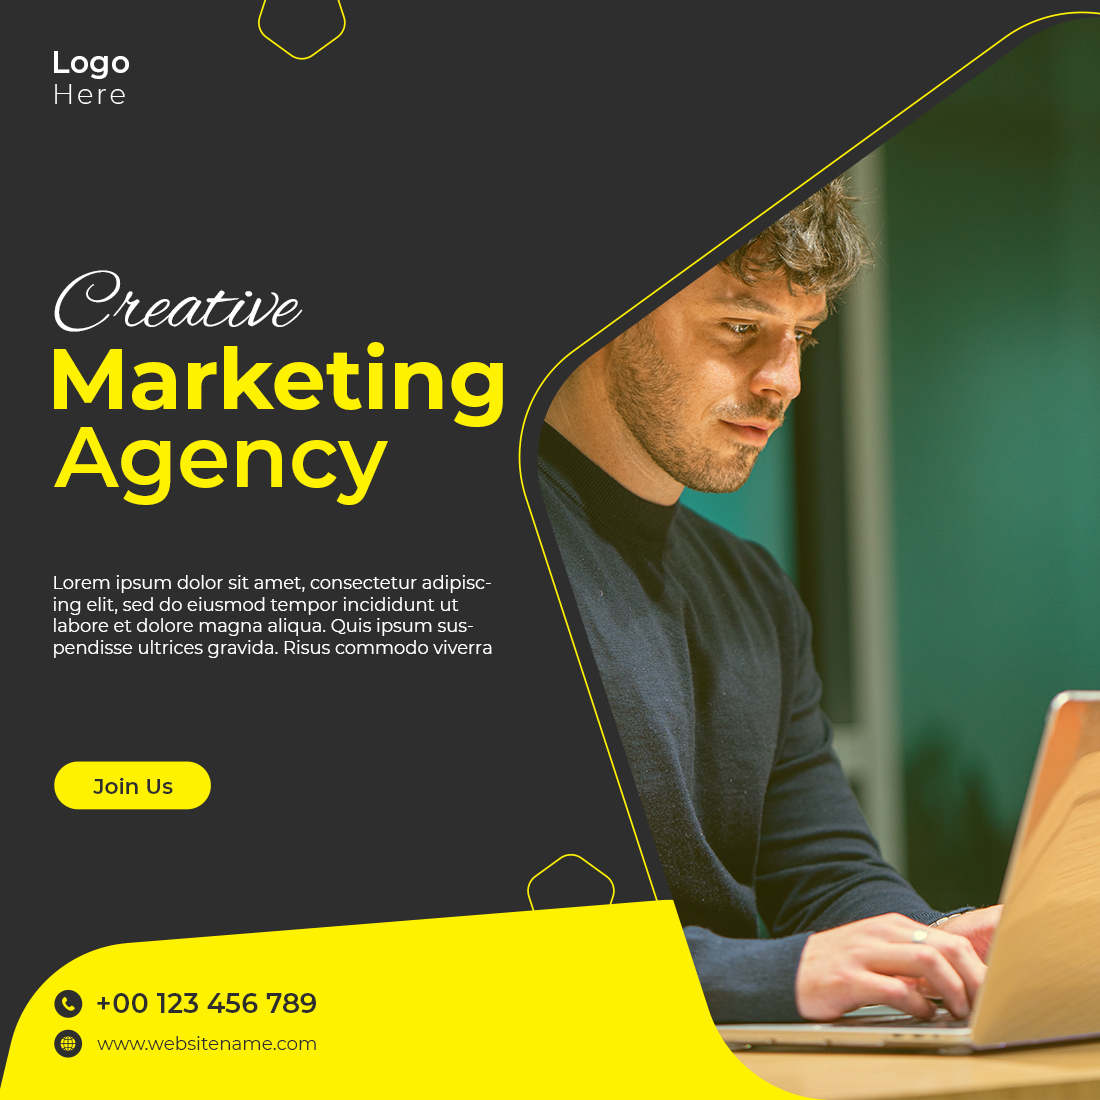 Creative Marketing Agency Social Media Post Template preview image.